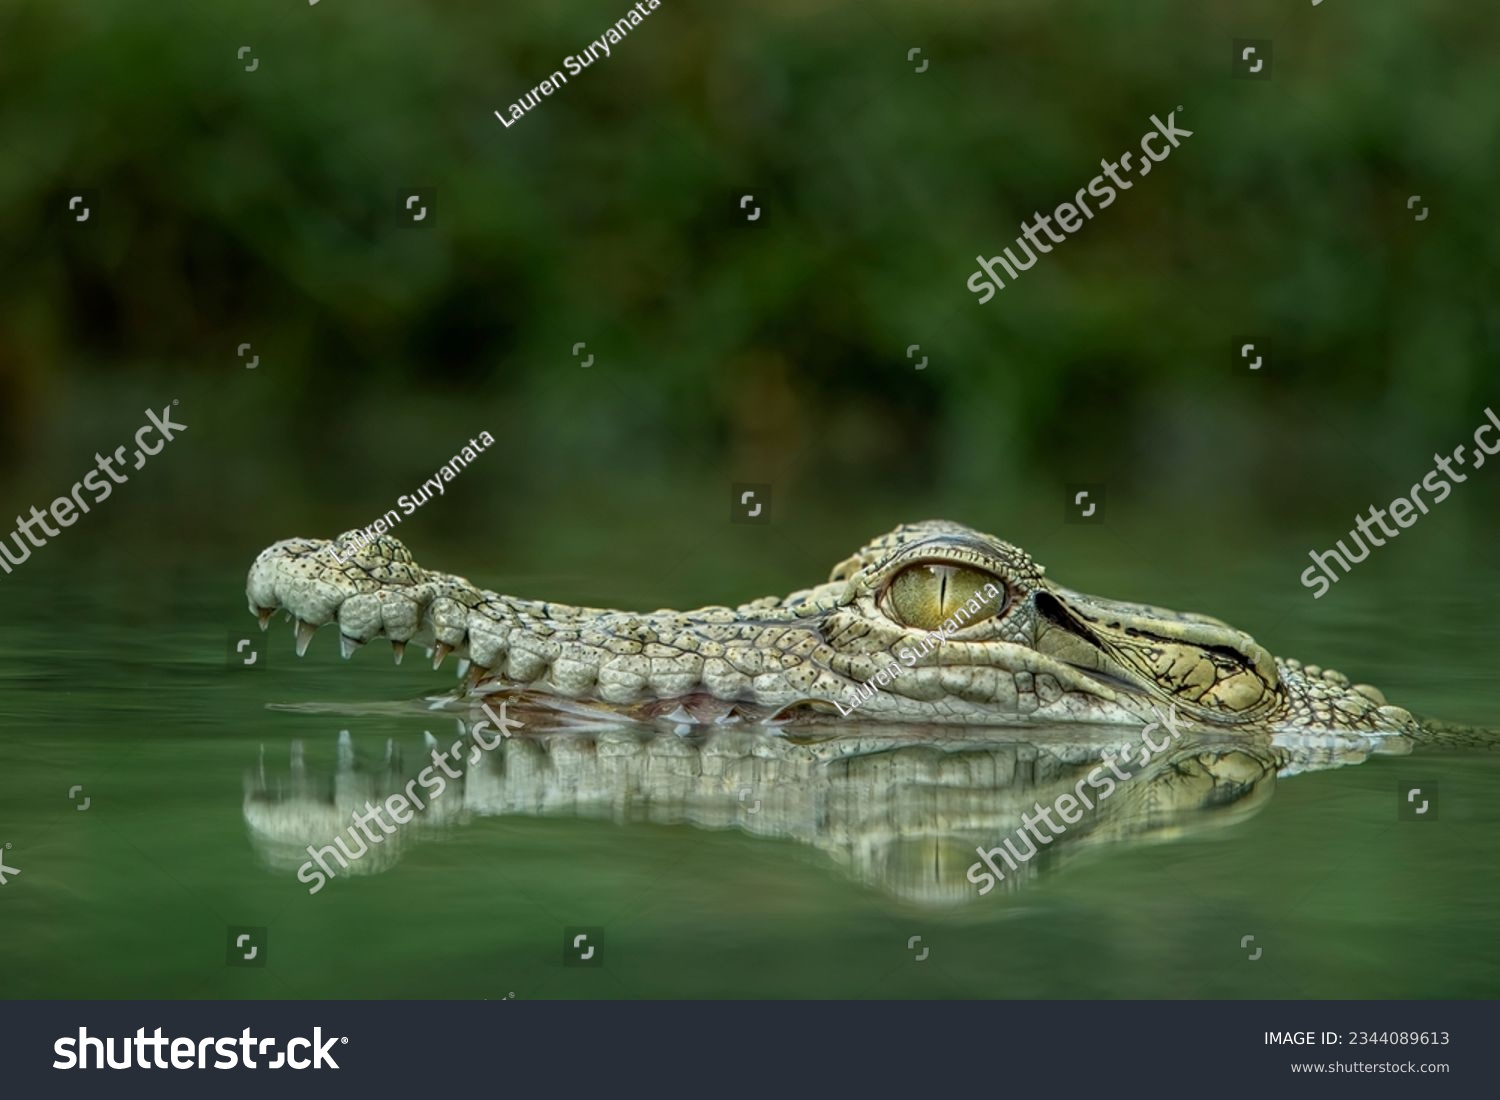 The Saltwater Crocodile (Crocodylus porosus) in the river on Borneo island, Indonesia. The species is one of the largest living crocodile in the world.  #2344089613